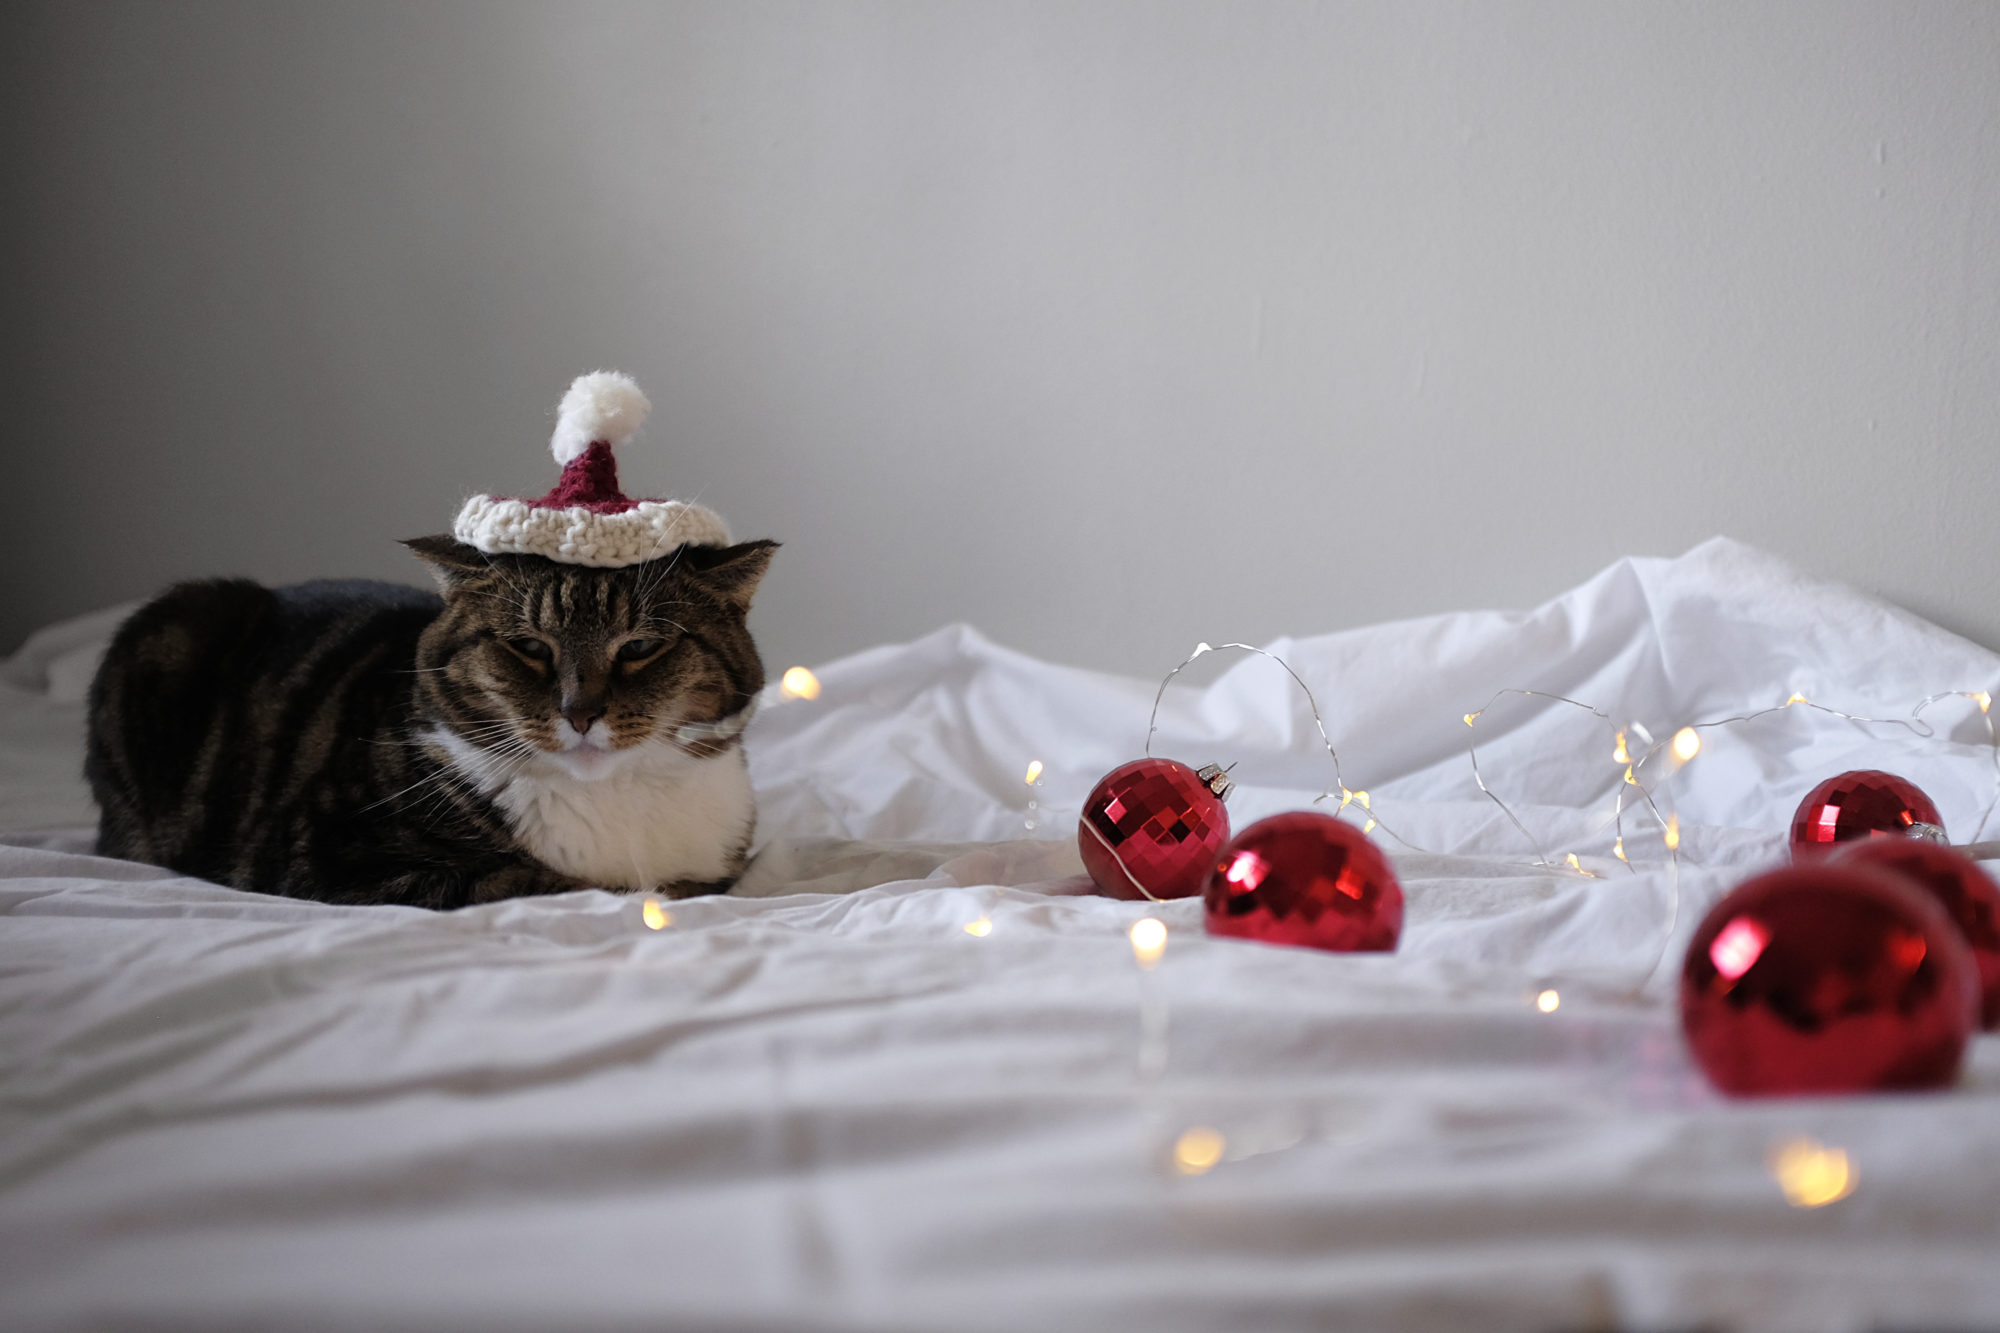 Meow sits on a sheet strewn with Christmas lights and ornaments, wearing a Santa hat. She looks very unamused